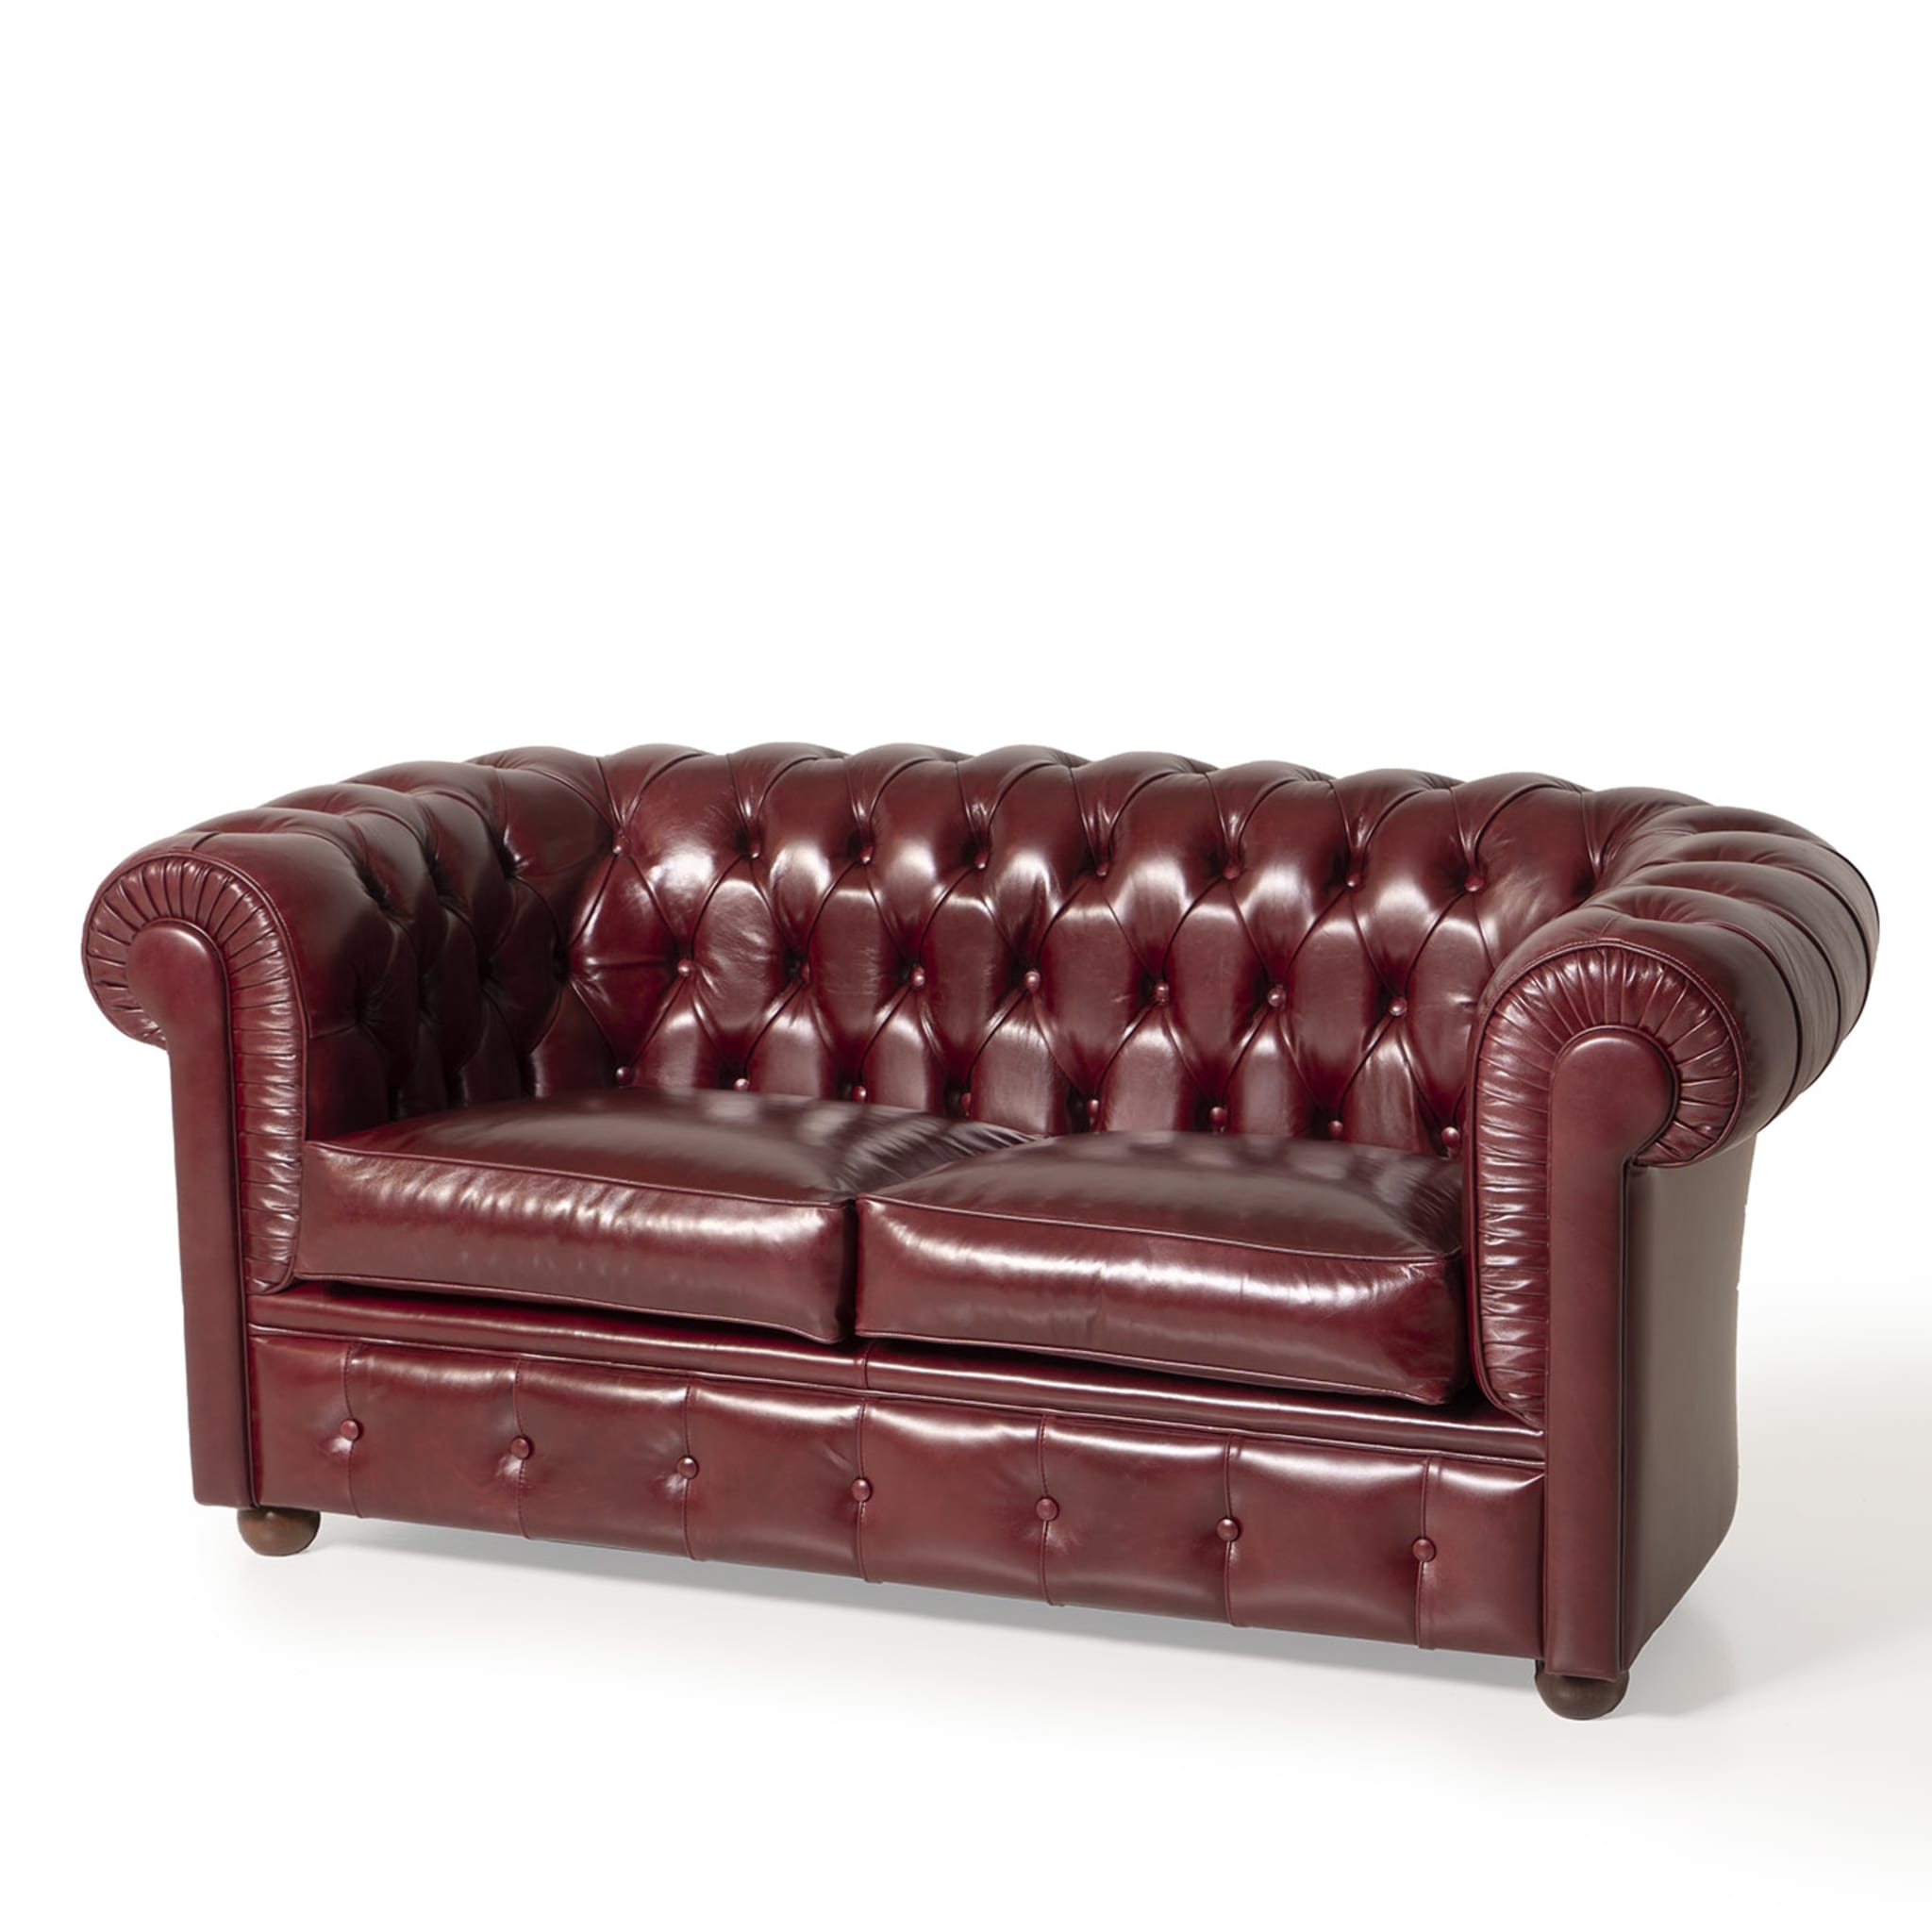 Chesterfield Bordeaux Leather Sofa - Alternative view 4